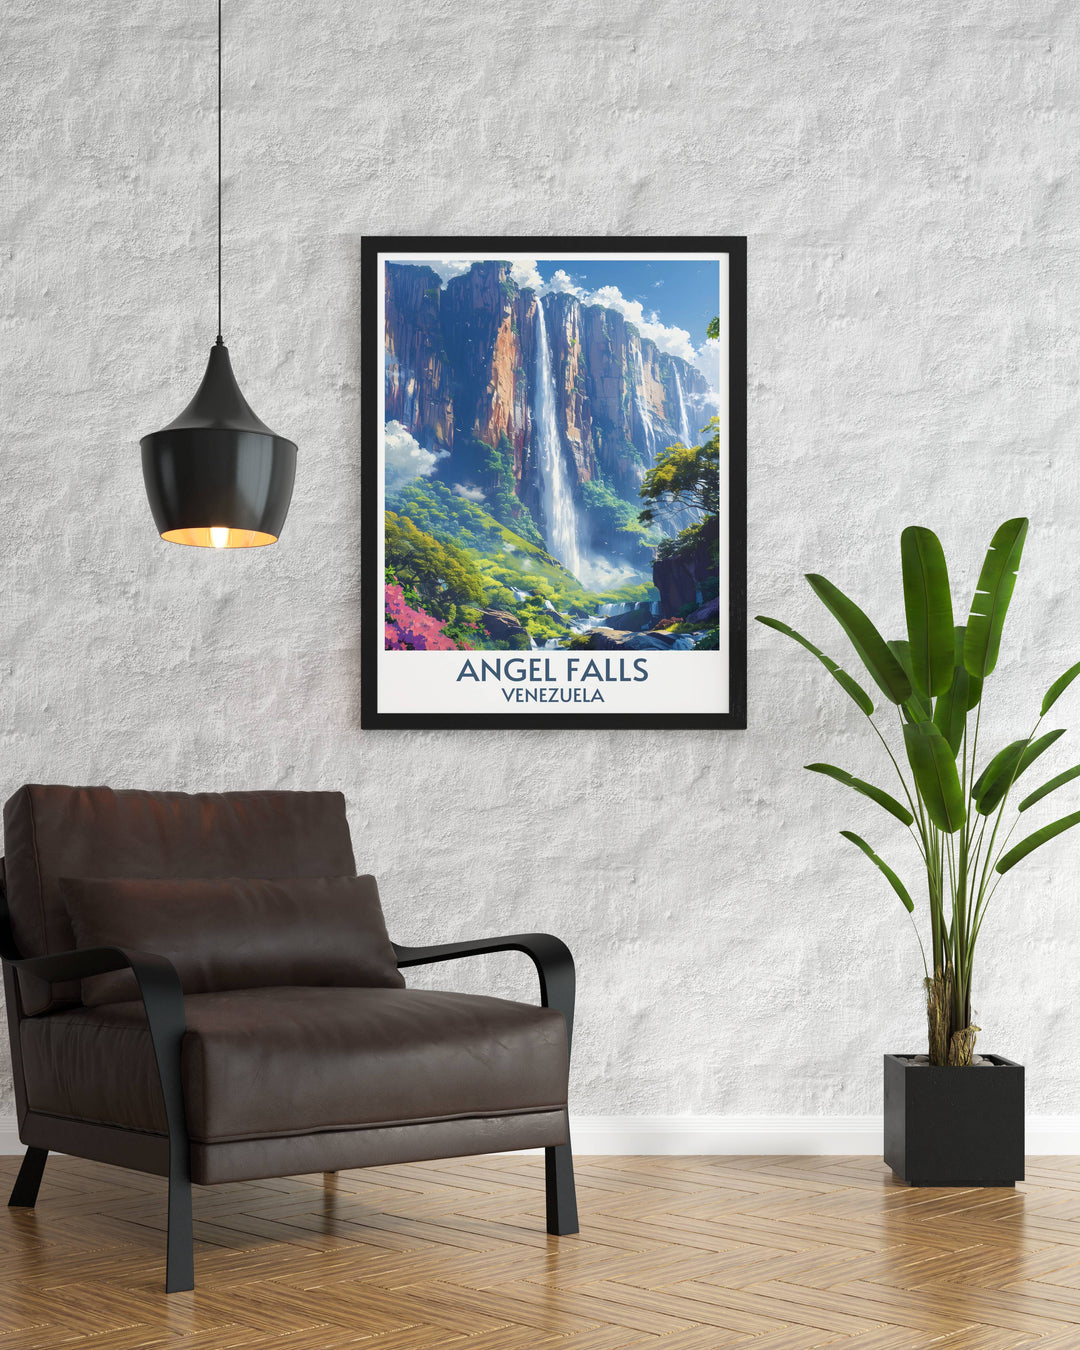 Gift-ready Angel Falls poster, an inspiring portrayal of Venezuela’s iconic waterfall, ideal for art enthusiasts.